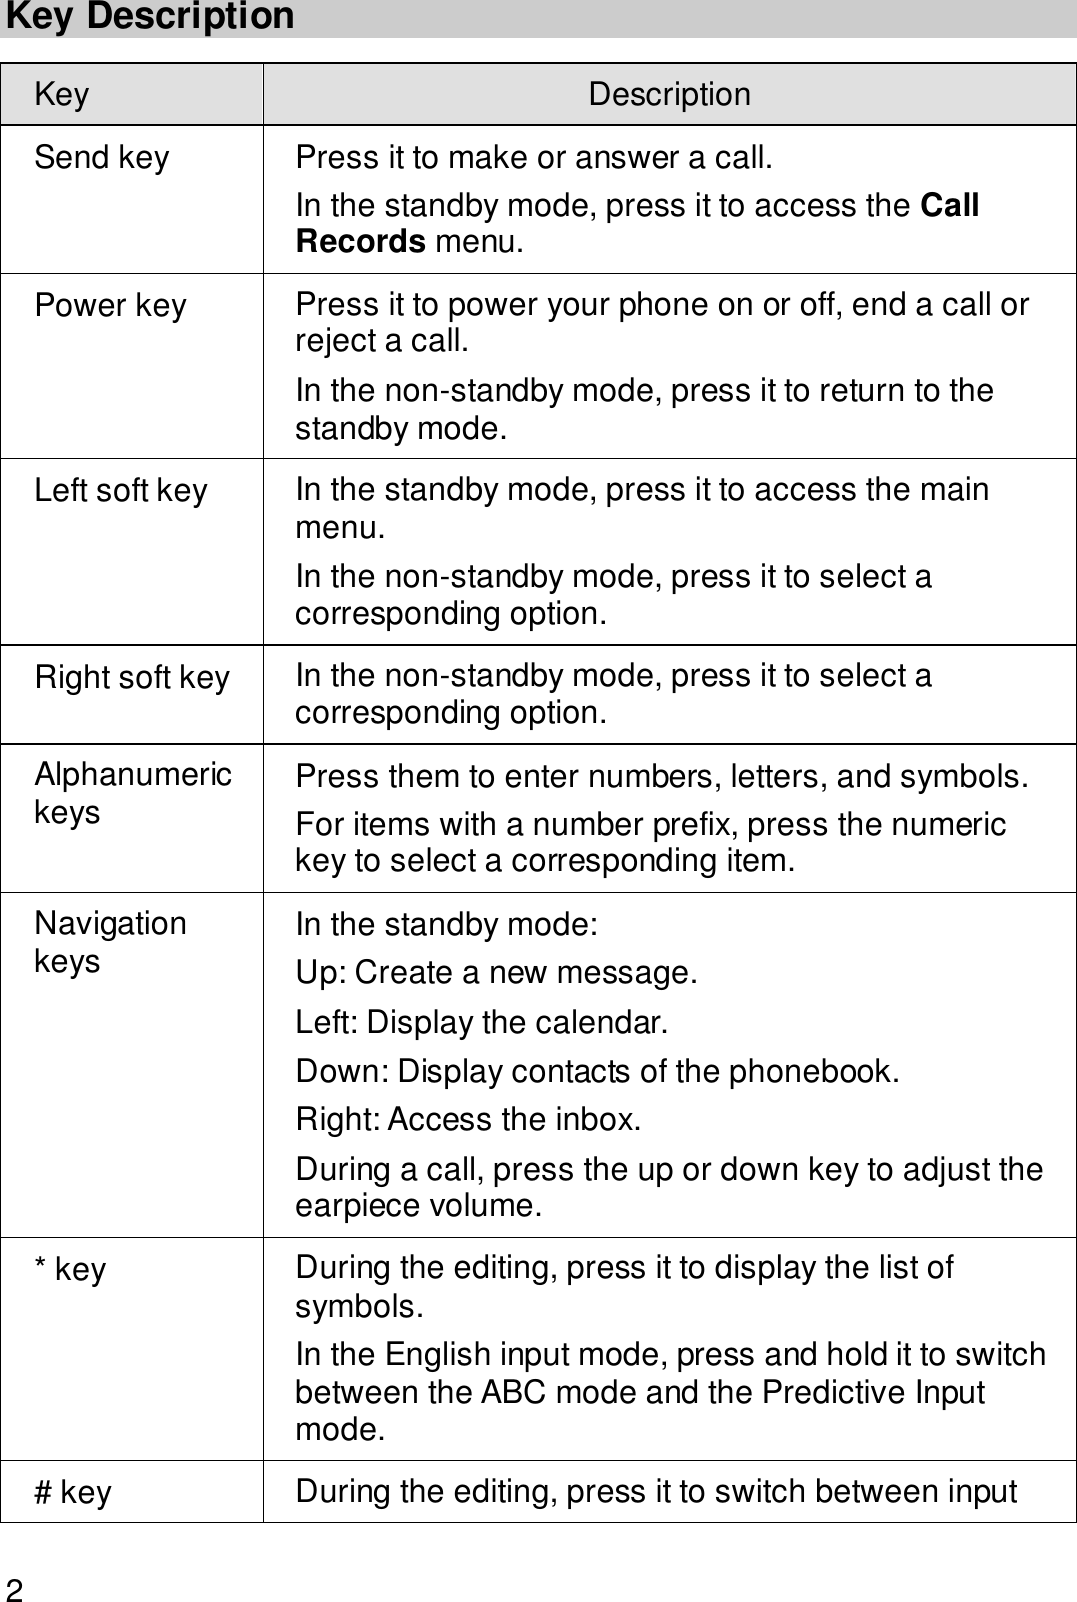  2 Key Description Key  Description Send key  Press it to make or answer a call. In the standby mode, press it to access the Call Records menu.  Power key  Press it to power your phone on or off, end a call or reject a call. In the non-standby mode, press it to return to the standby mode. Left soft key  In the standby mode, press it to access the main menu. In the non-standby mode, press it to select a corresponding option. Right soft key  In the non-standby mode, press it to select a corresponding option. Alphanumeric keys  Press them to enter numbers, letters, and symbols. For items with a number prefix, press the numeric key to select a corresponding item. Navigation keys  In the standby mode: Up: Create a new message. Left: Display the calendar. Down: Display contacts of the phonebook. Right: Access the inbox. During a call, press the up or down key to adjust the earpiece volume. * key  During the editing, press it to display the list of symbols. In the English input mode, press and hold it to switch between the ABC mode and the Predictive Input mode. # key  During the editing, press it to switch between input 